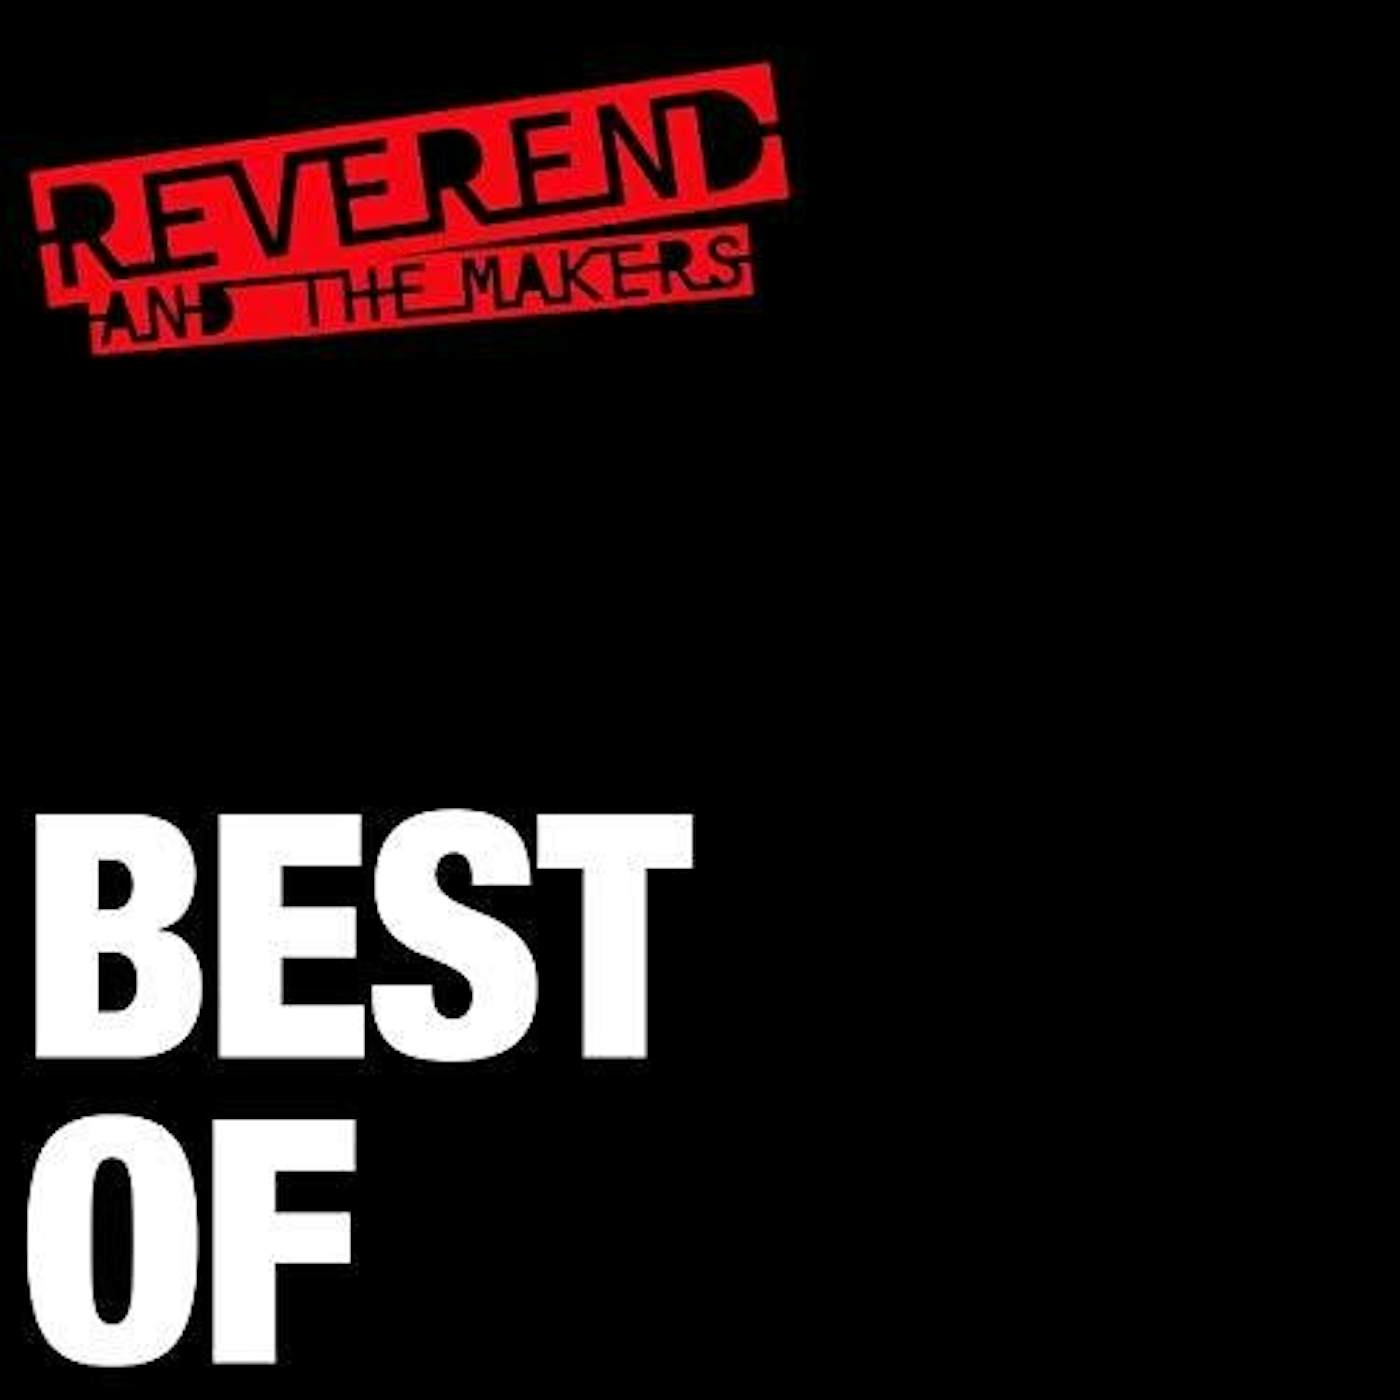 Reverend And The Makers BEST OF CD